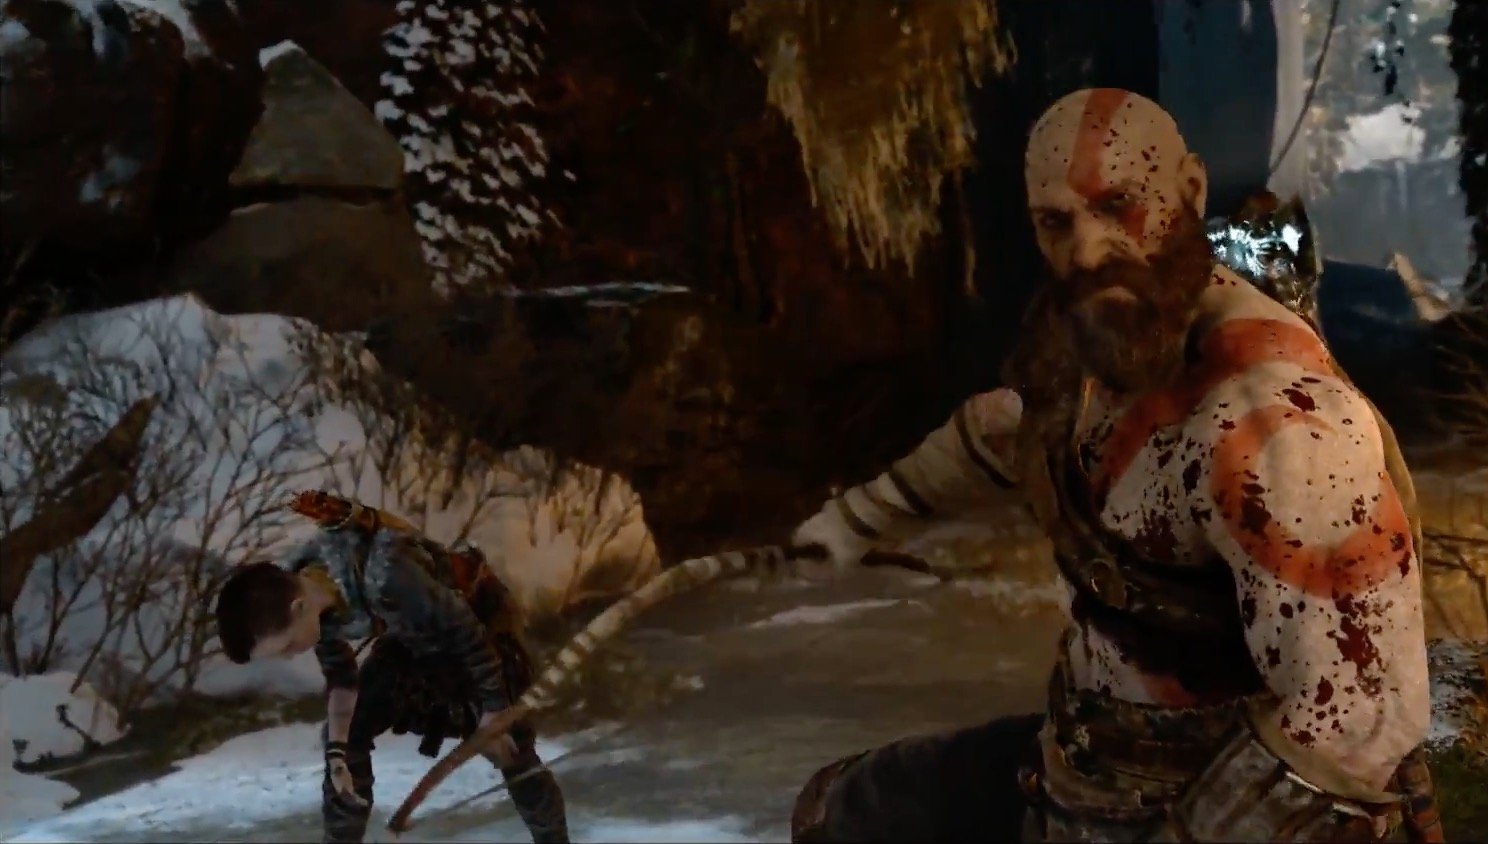 What you need to know about God of War 4, or the new God of War game announced at E3 2016.